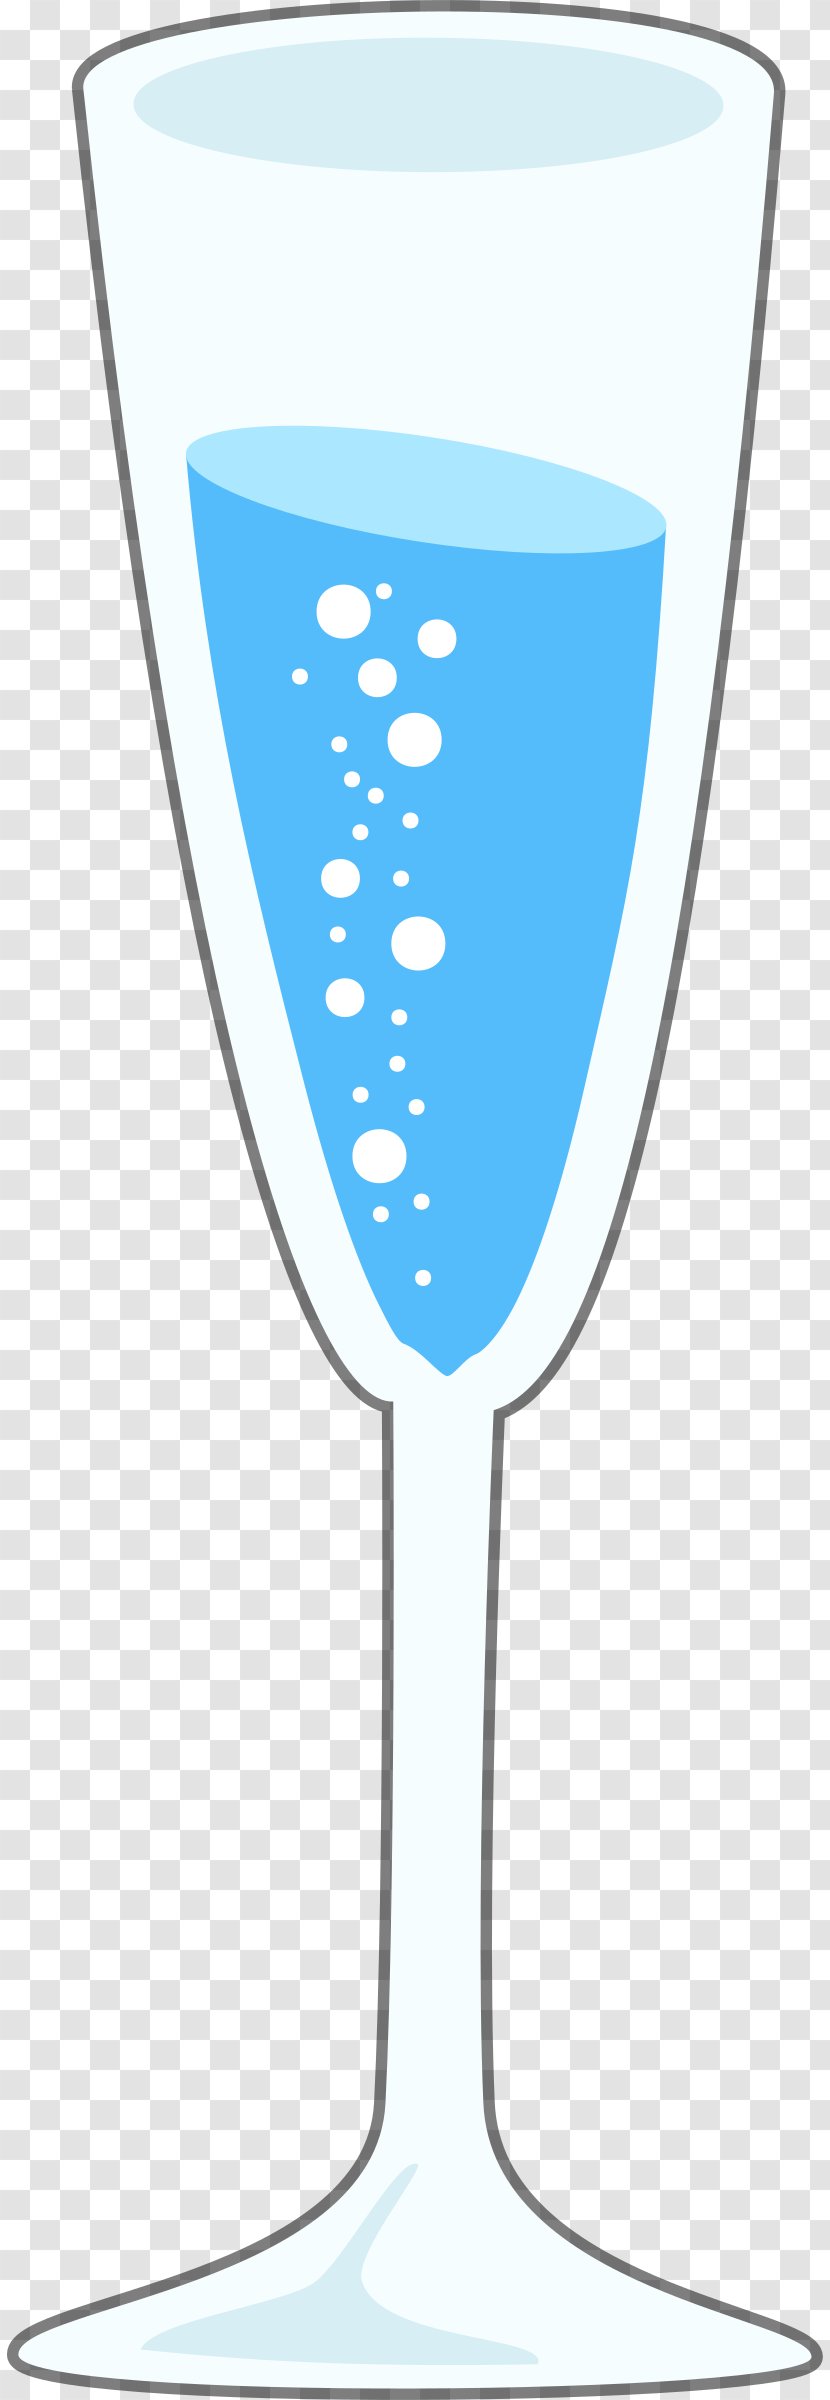 Carbonated Water Champagne Glass Clip Art - Drinking - Sparkling Transparent PNG